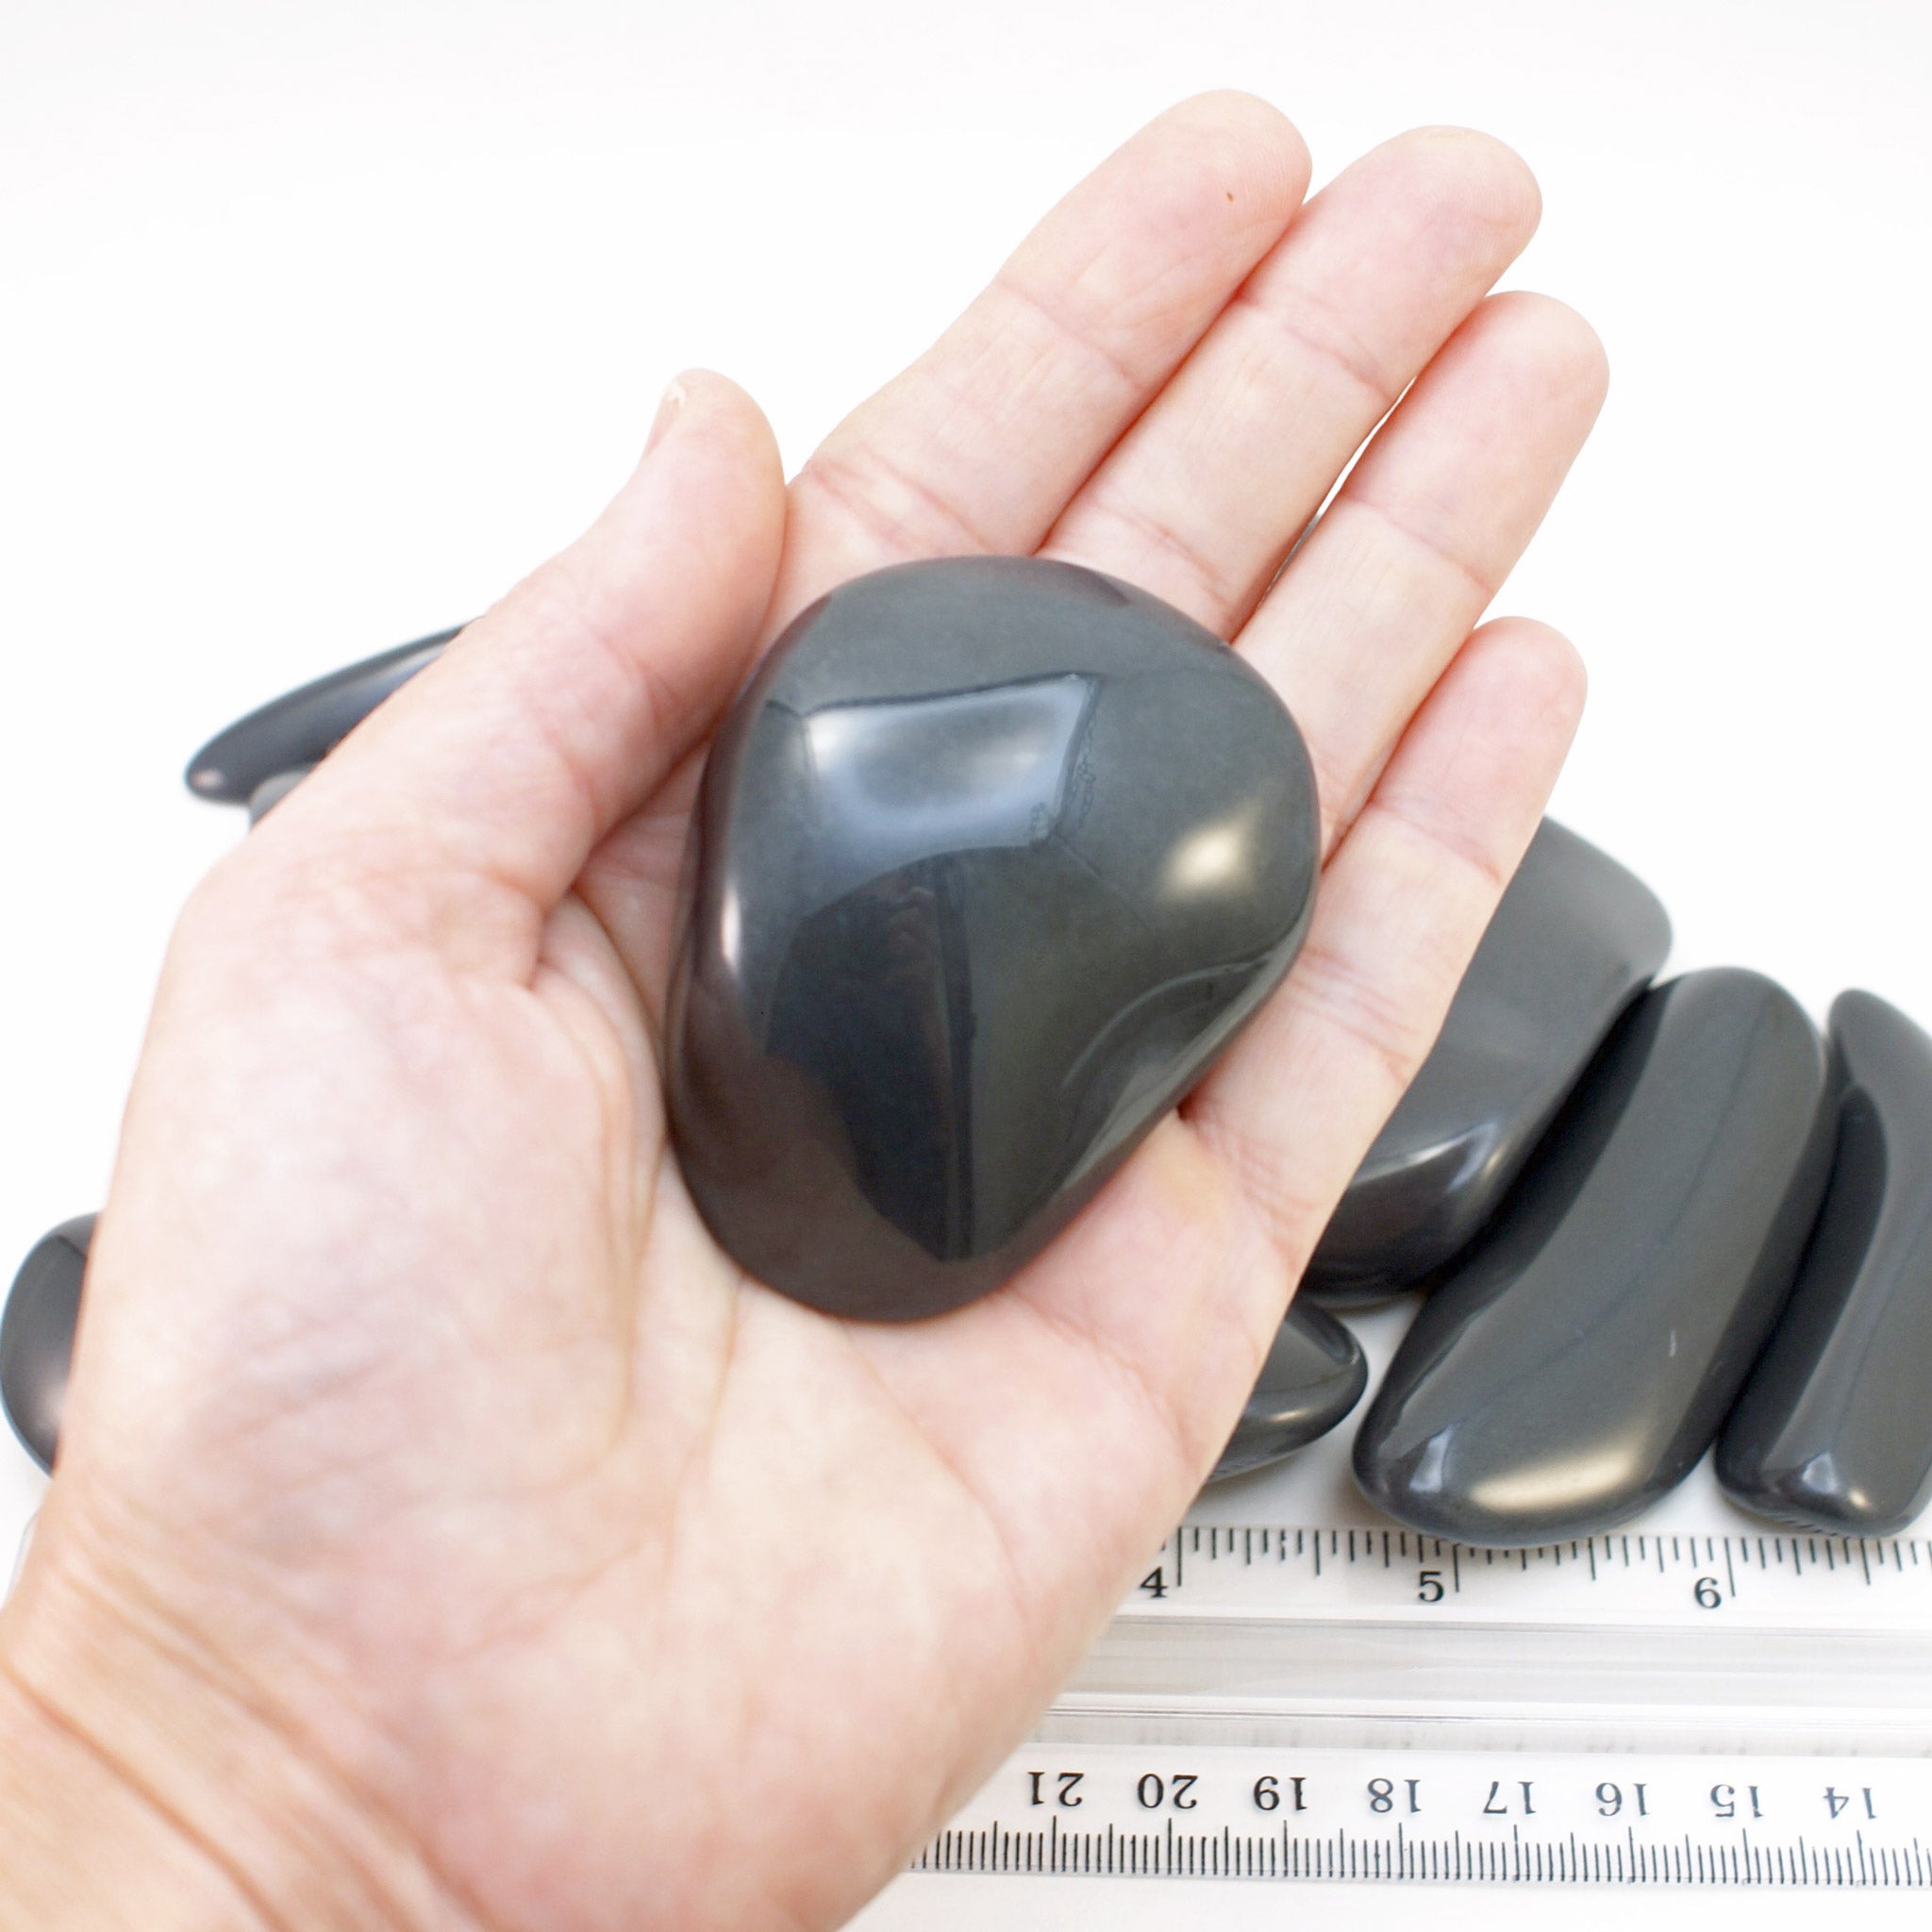 Extra-large polished dacite palm stone in hand